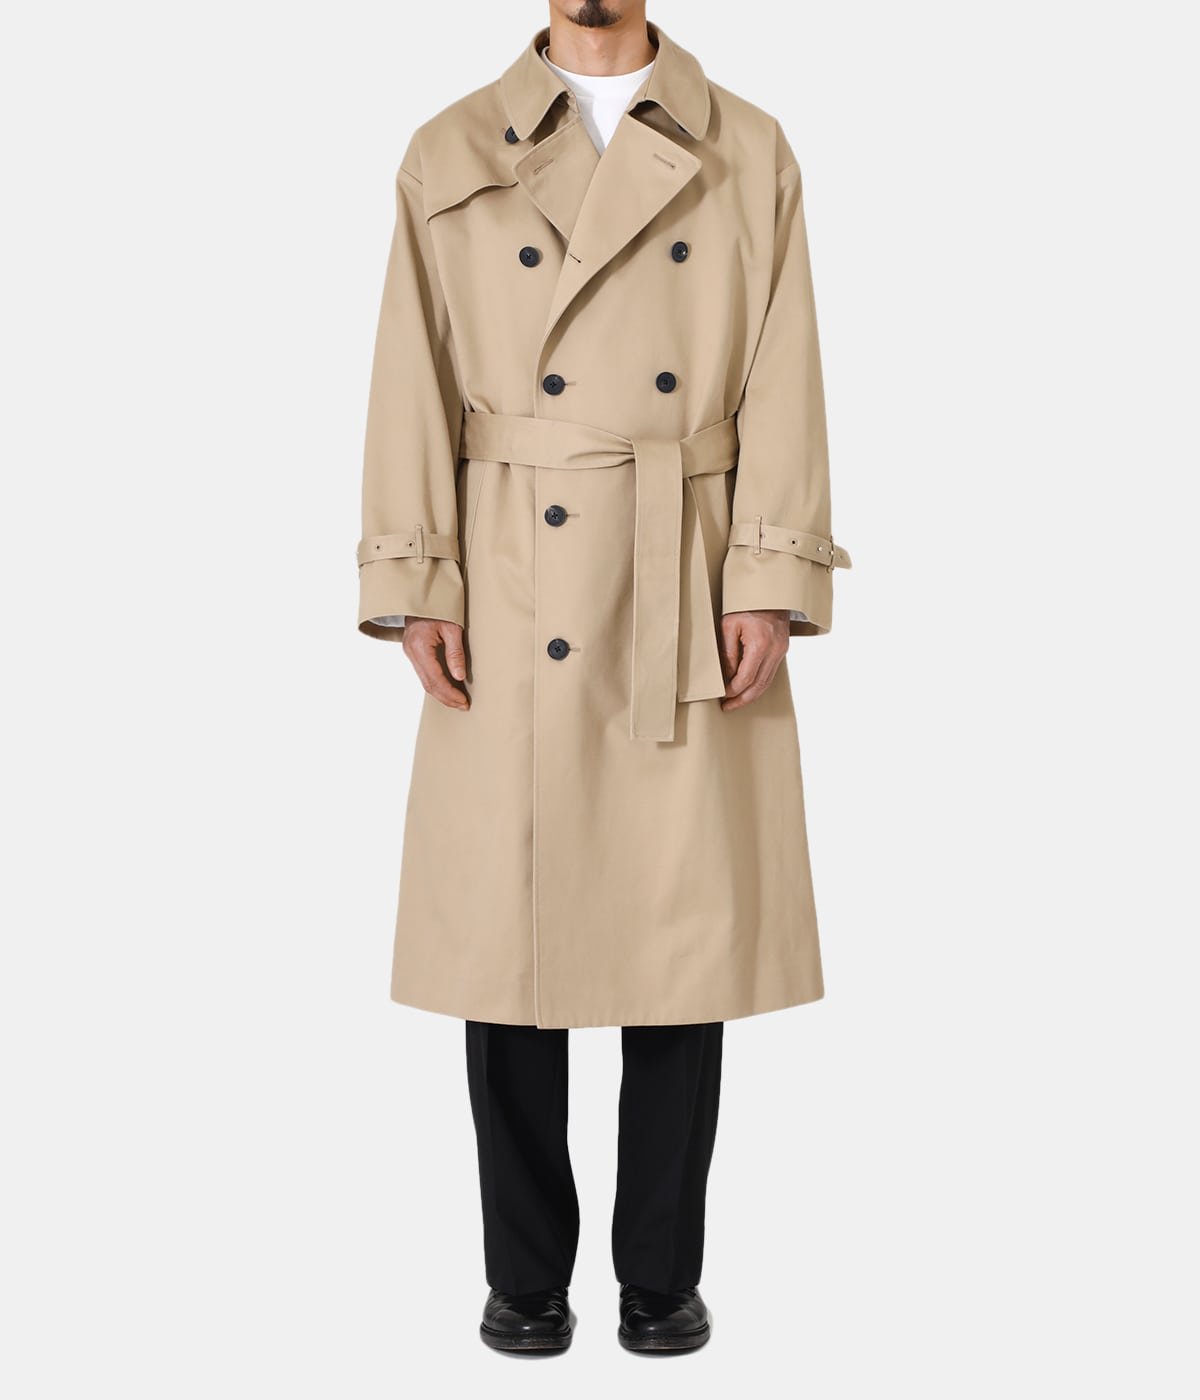 WEST POINT OVERSIZED TRENCH COAT